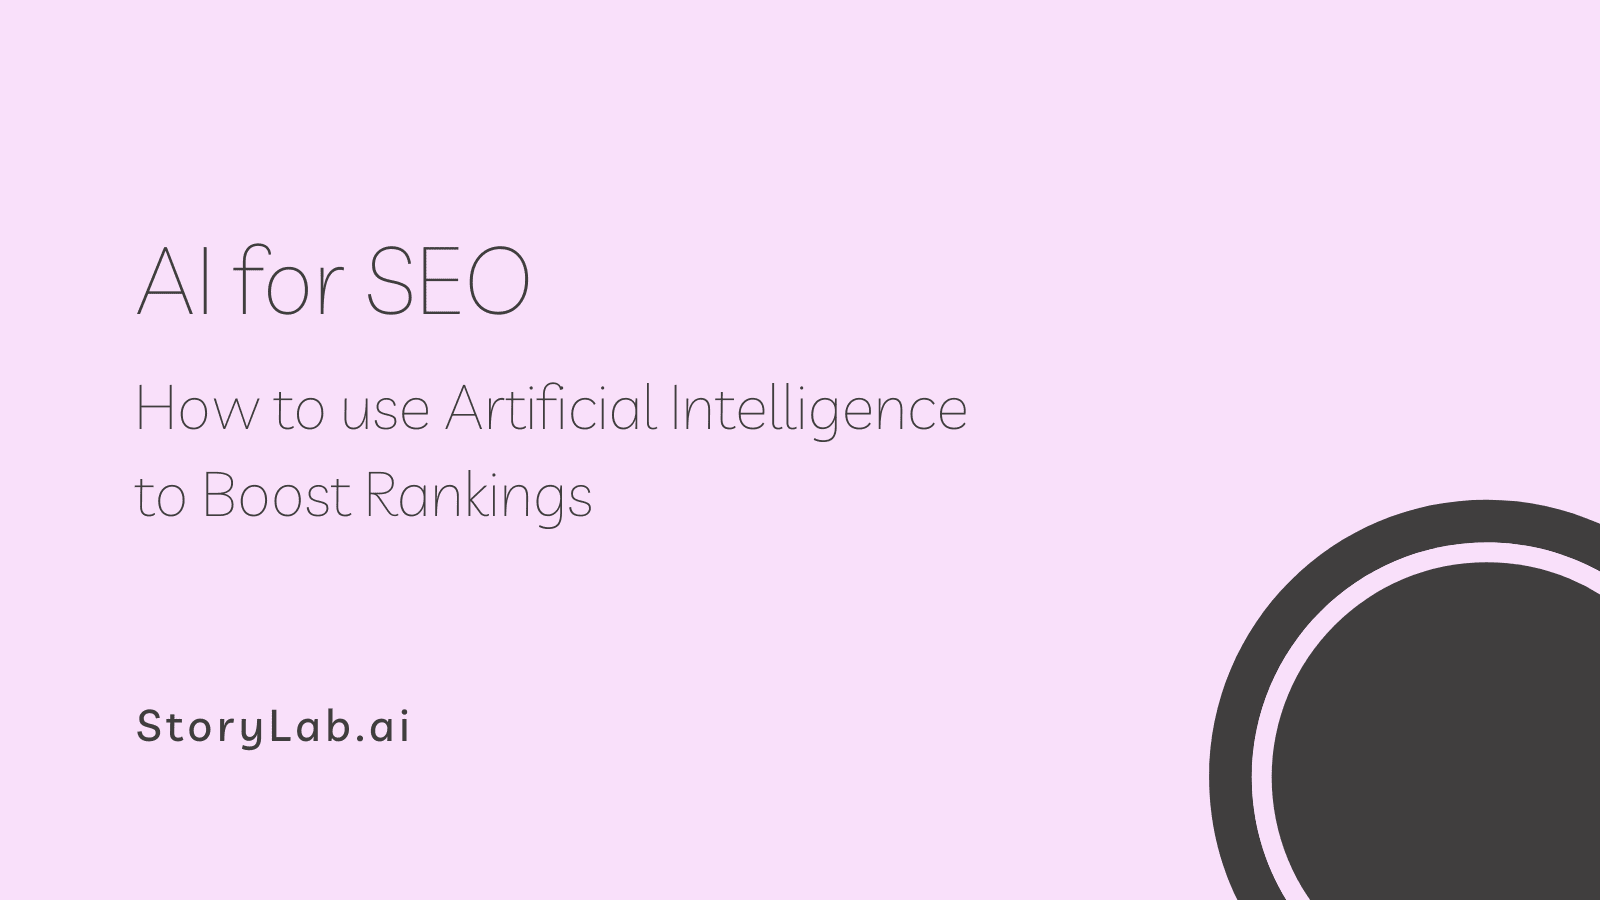 Start with AI for SEO